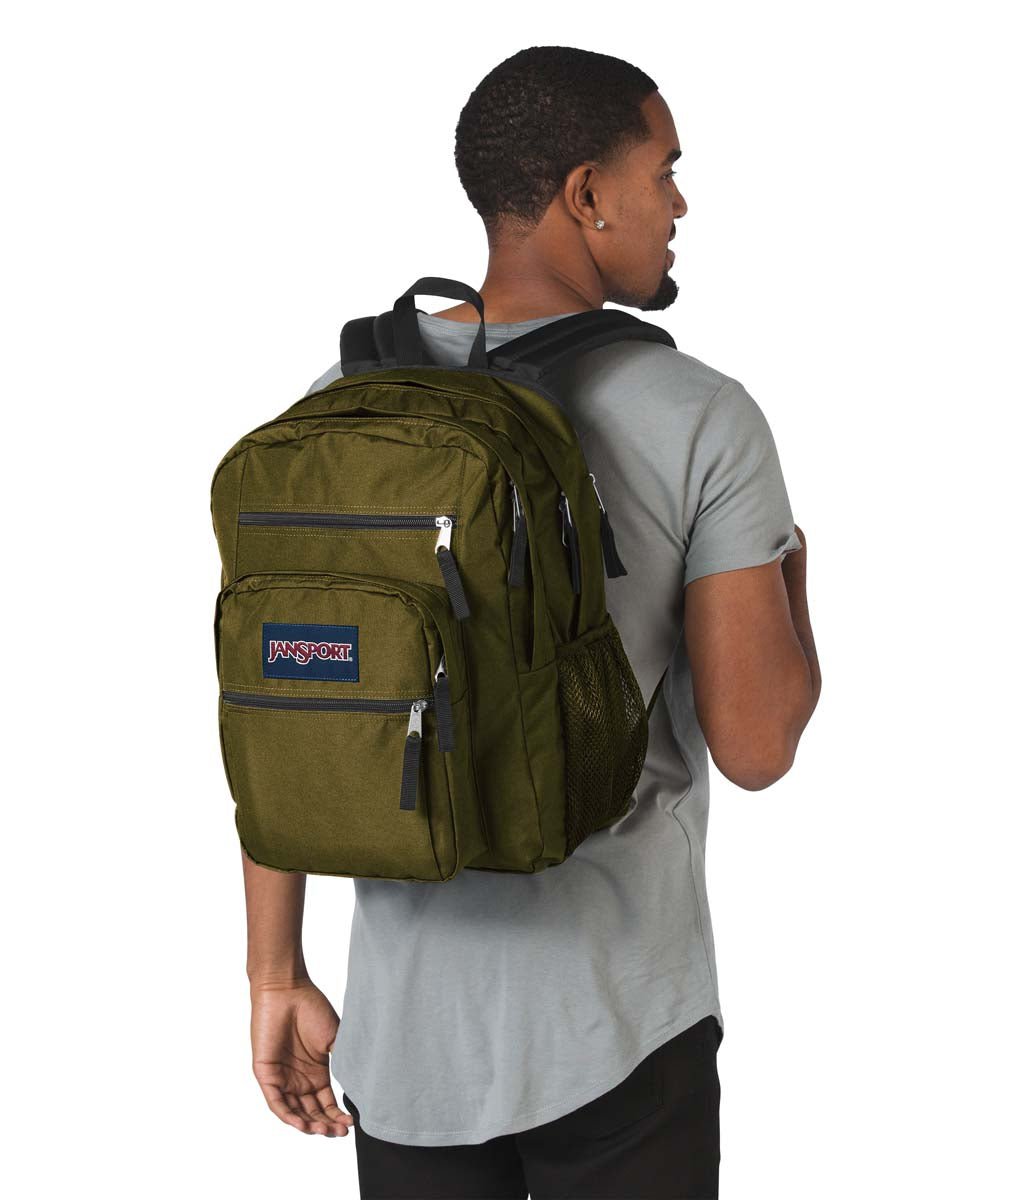 JanSport Big Student Backpack - Army Green